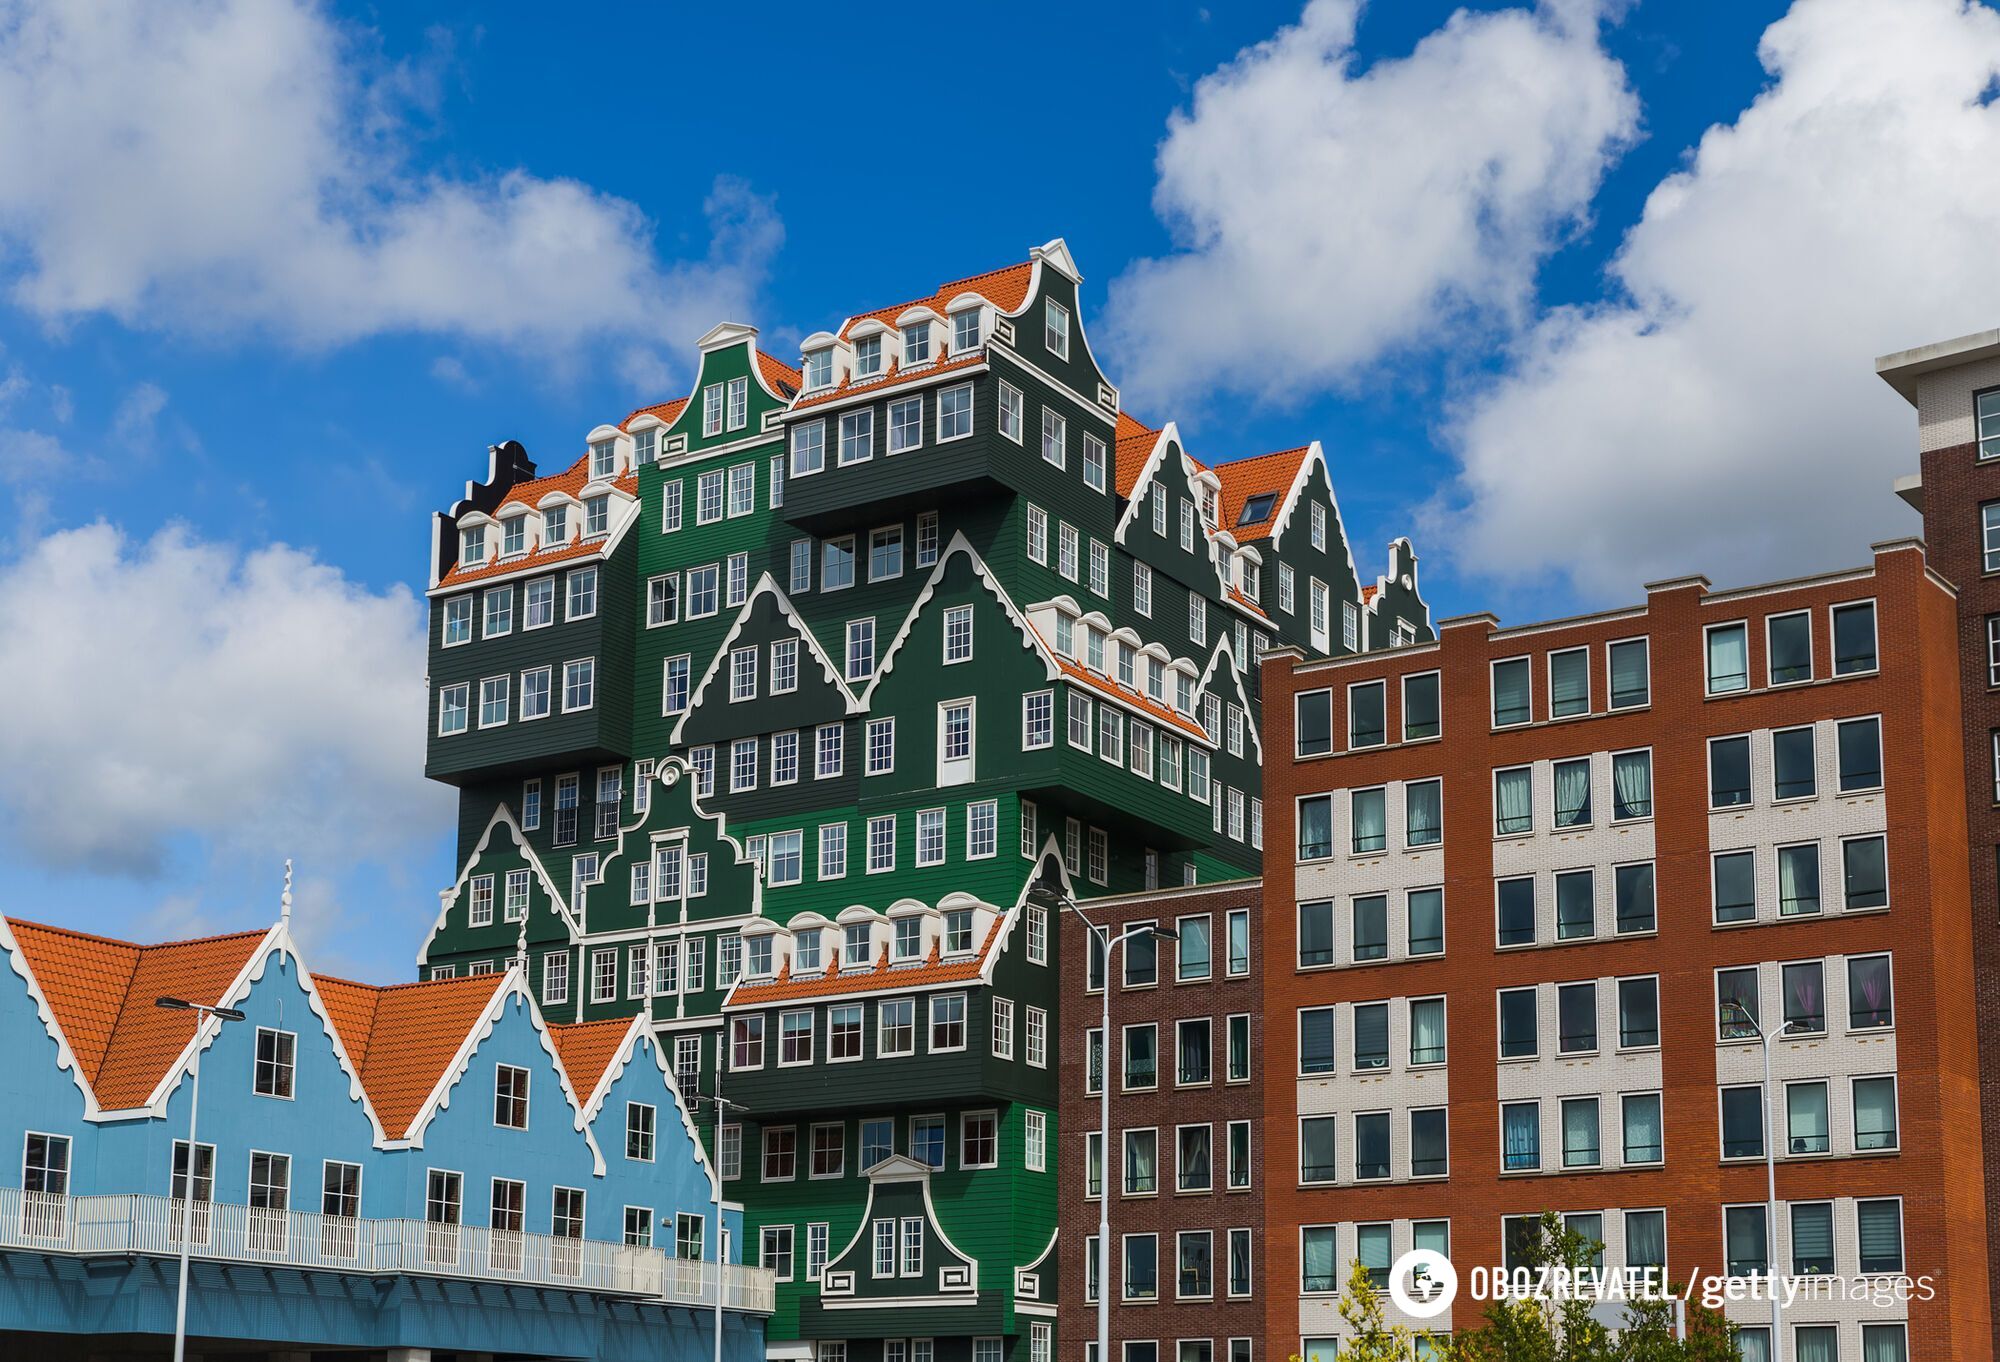 It looks like a Lego set. What does an unusual city in Europe, which is called a cheap alternative to Amsterdam, look like?